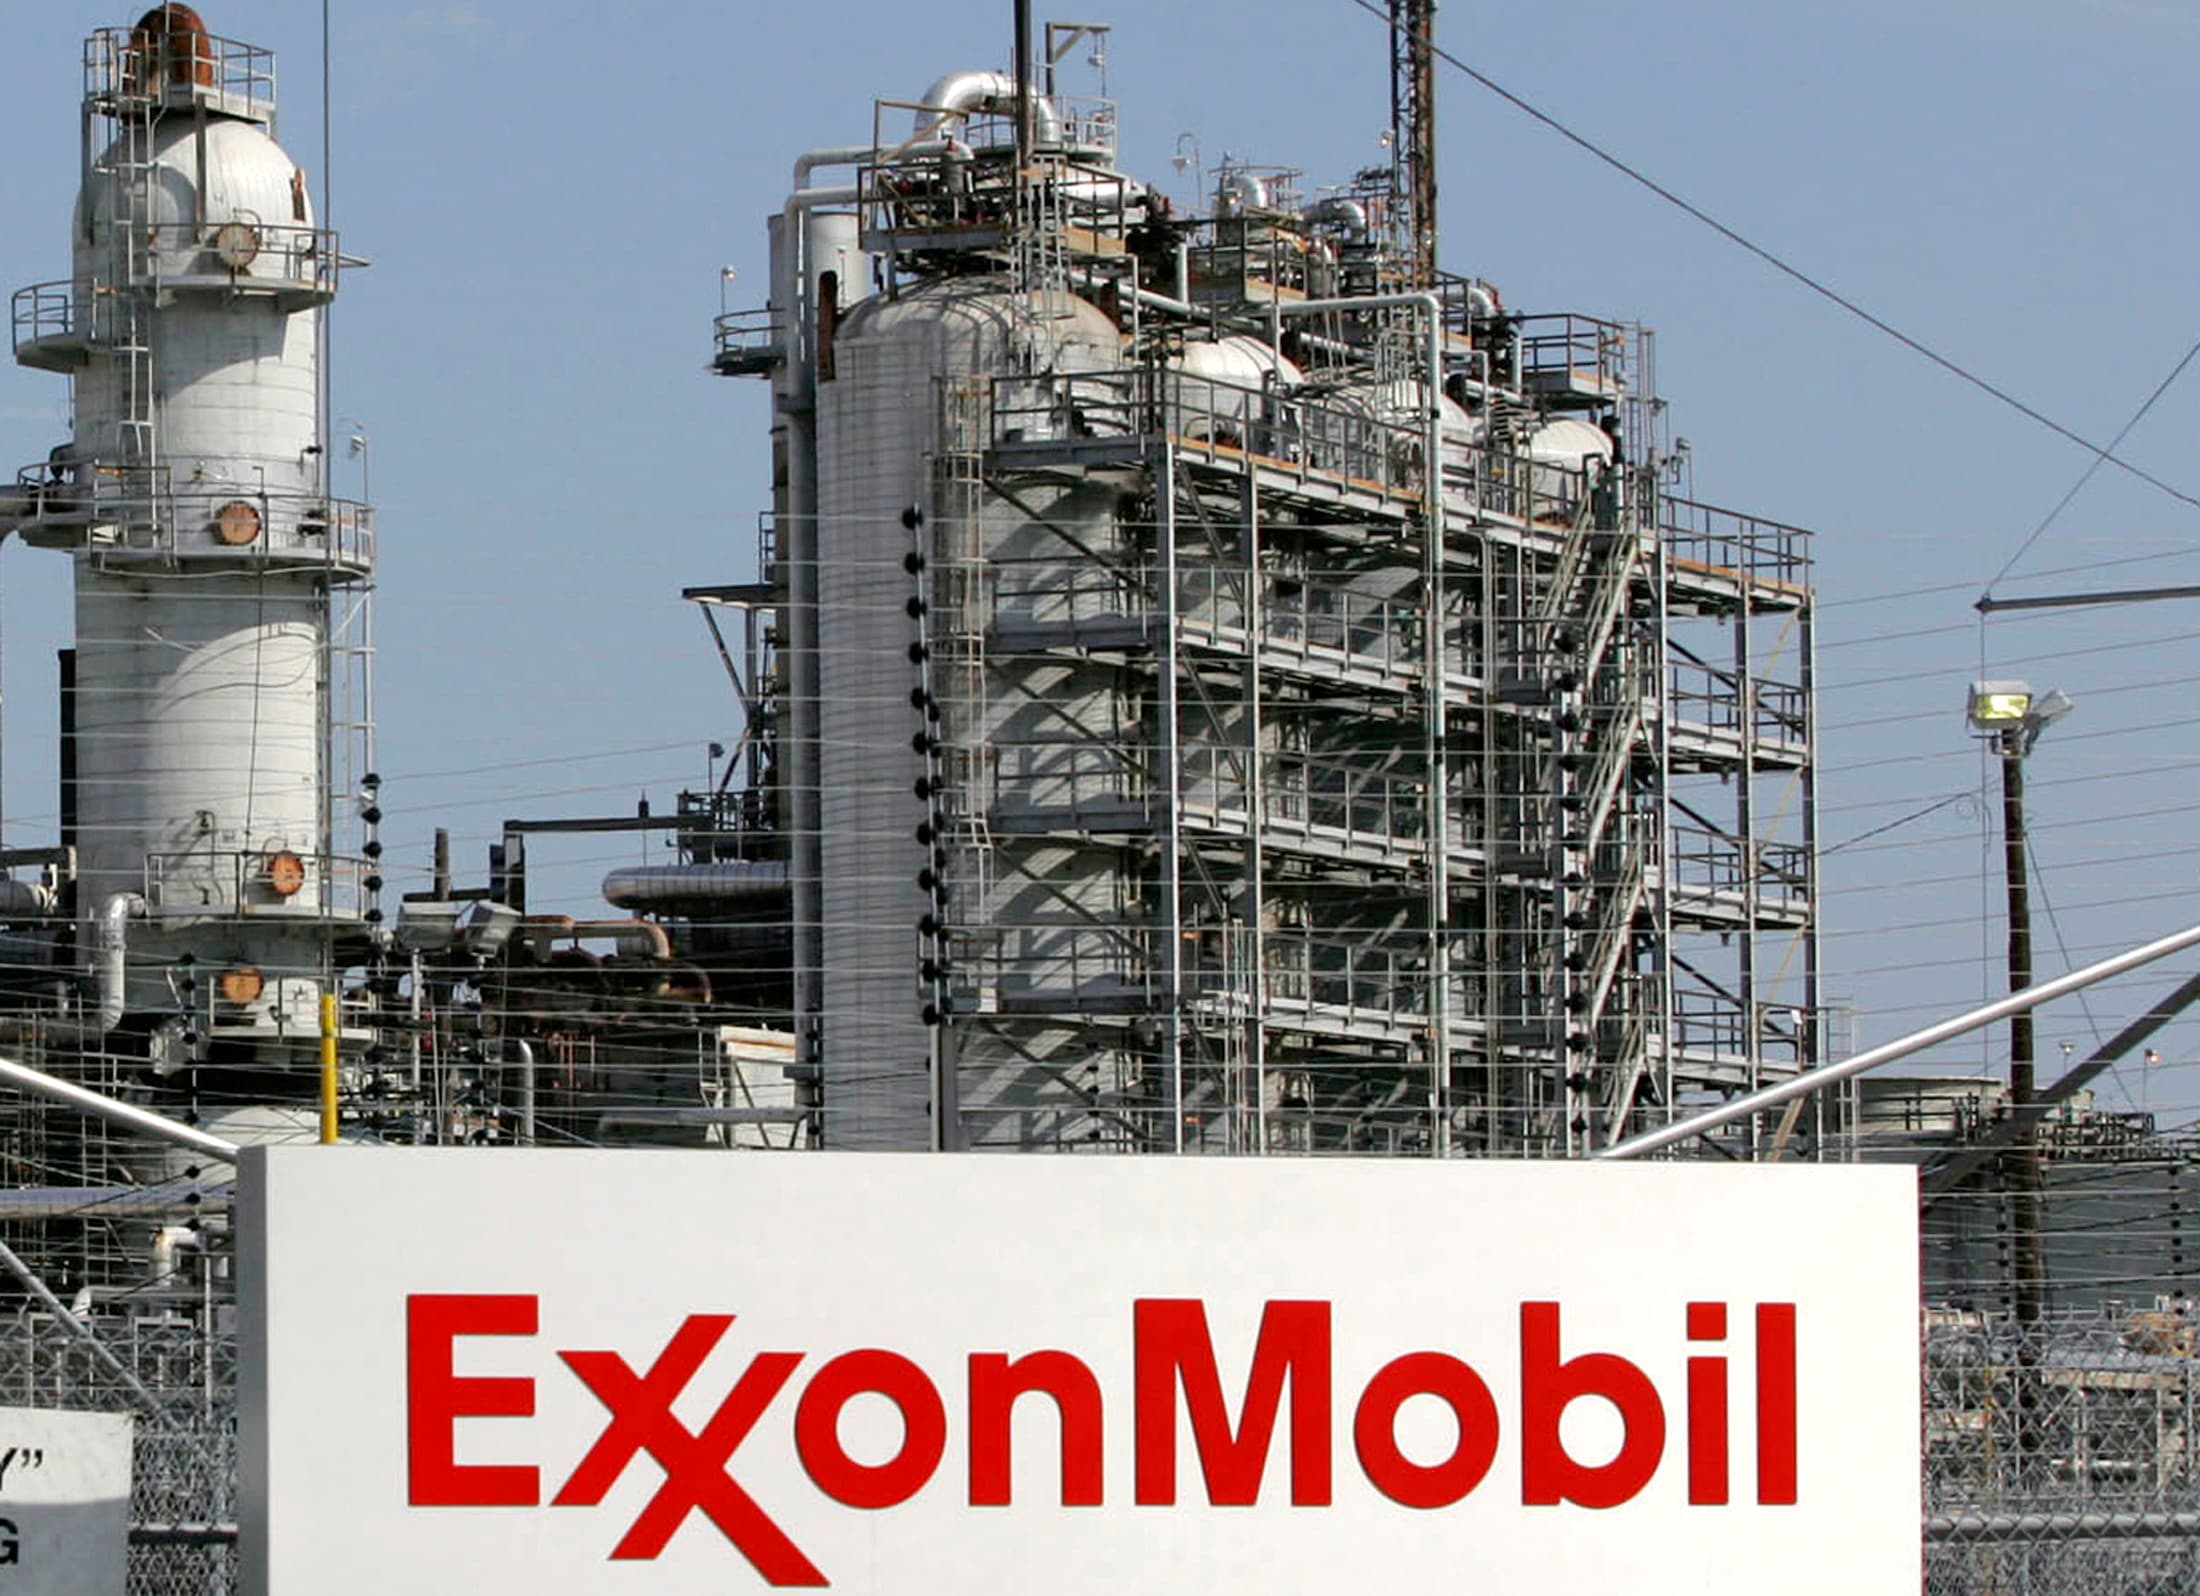 Exxon reportedly investigated by the SEC over valuation of key asset